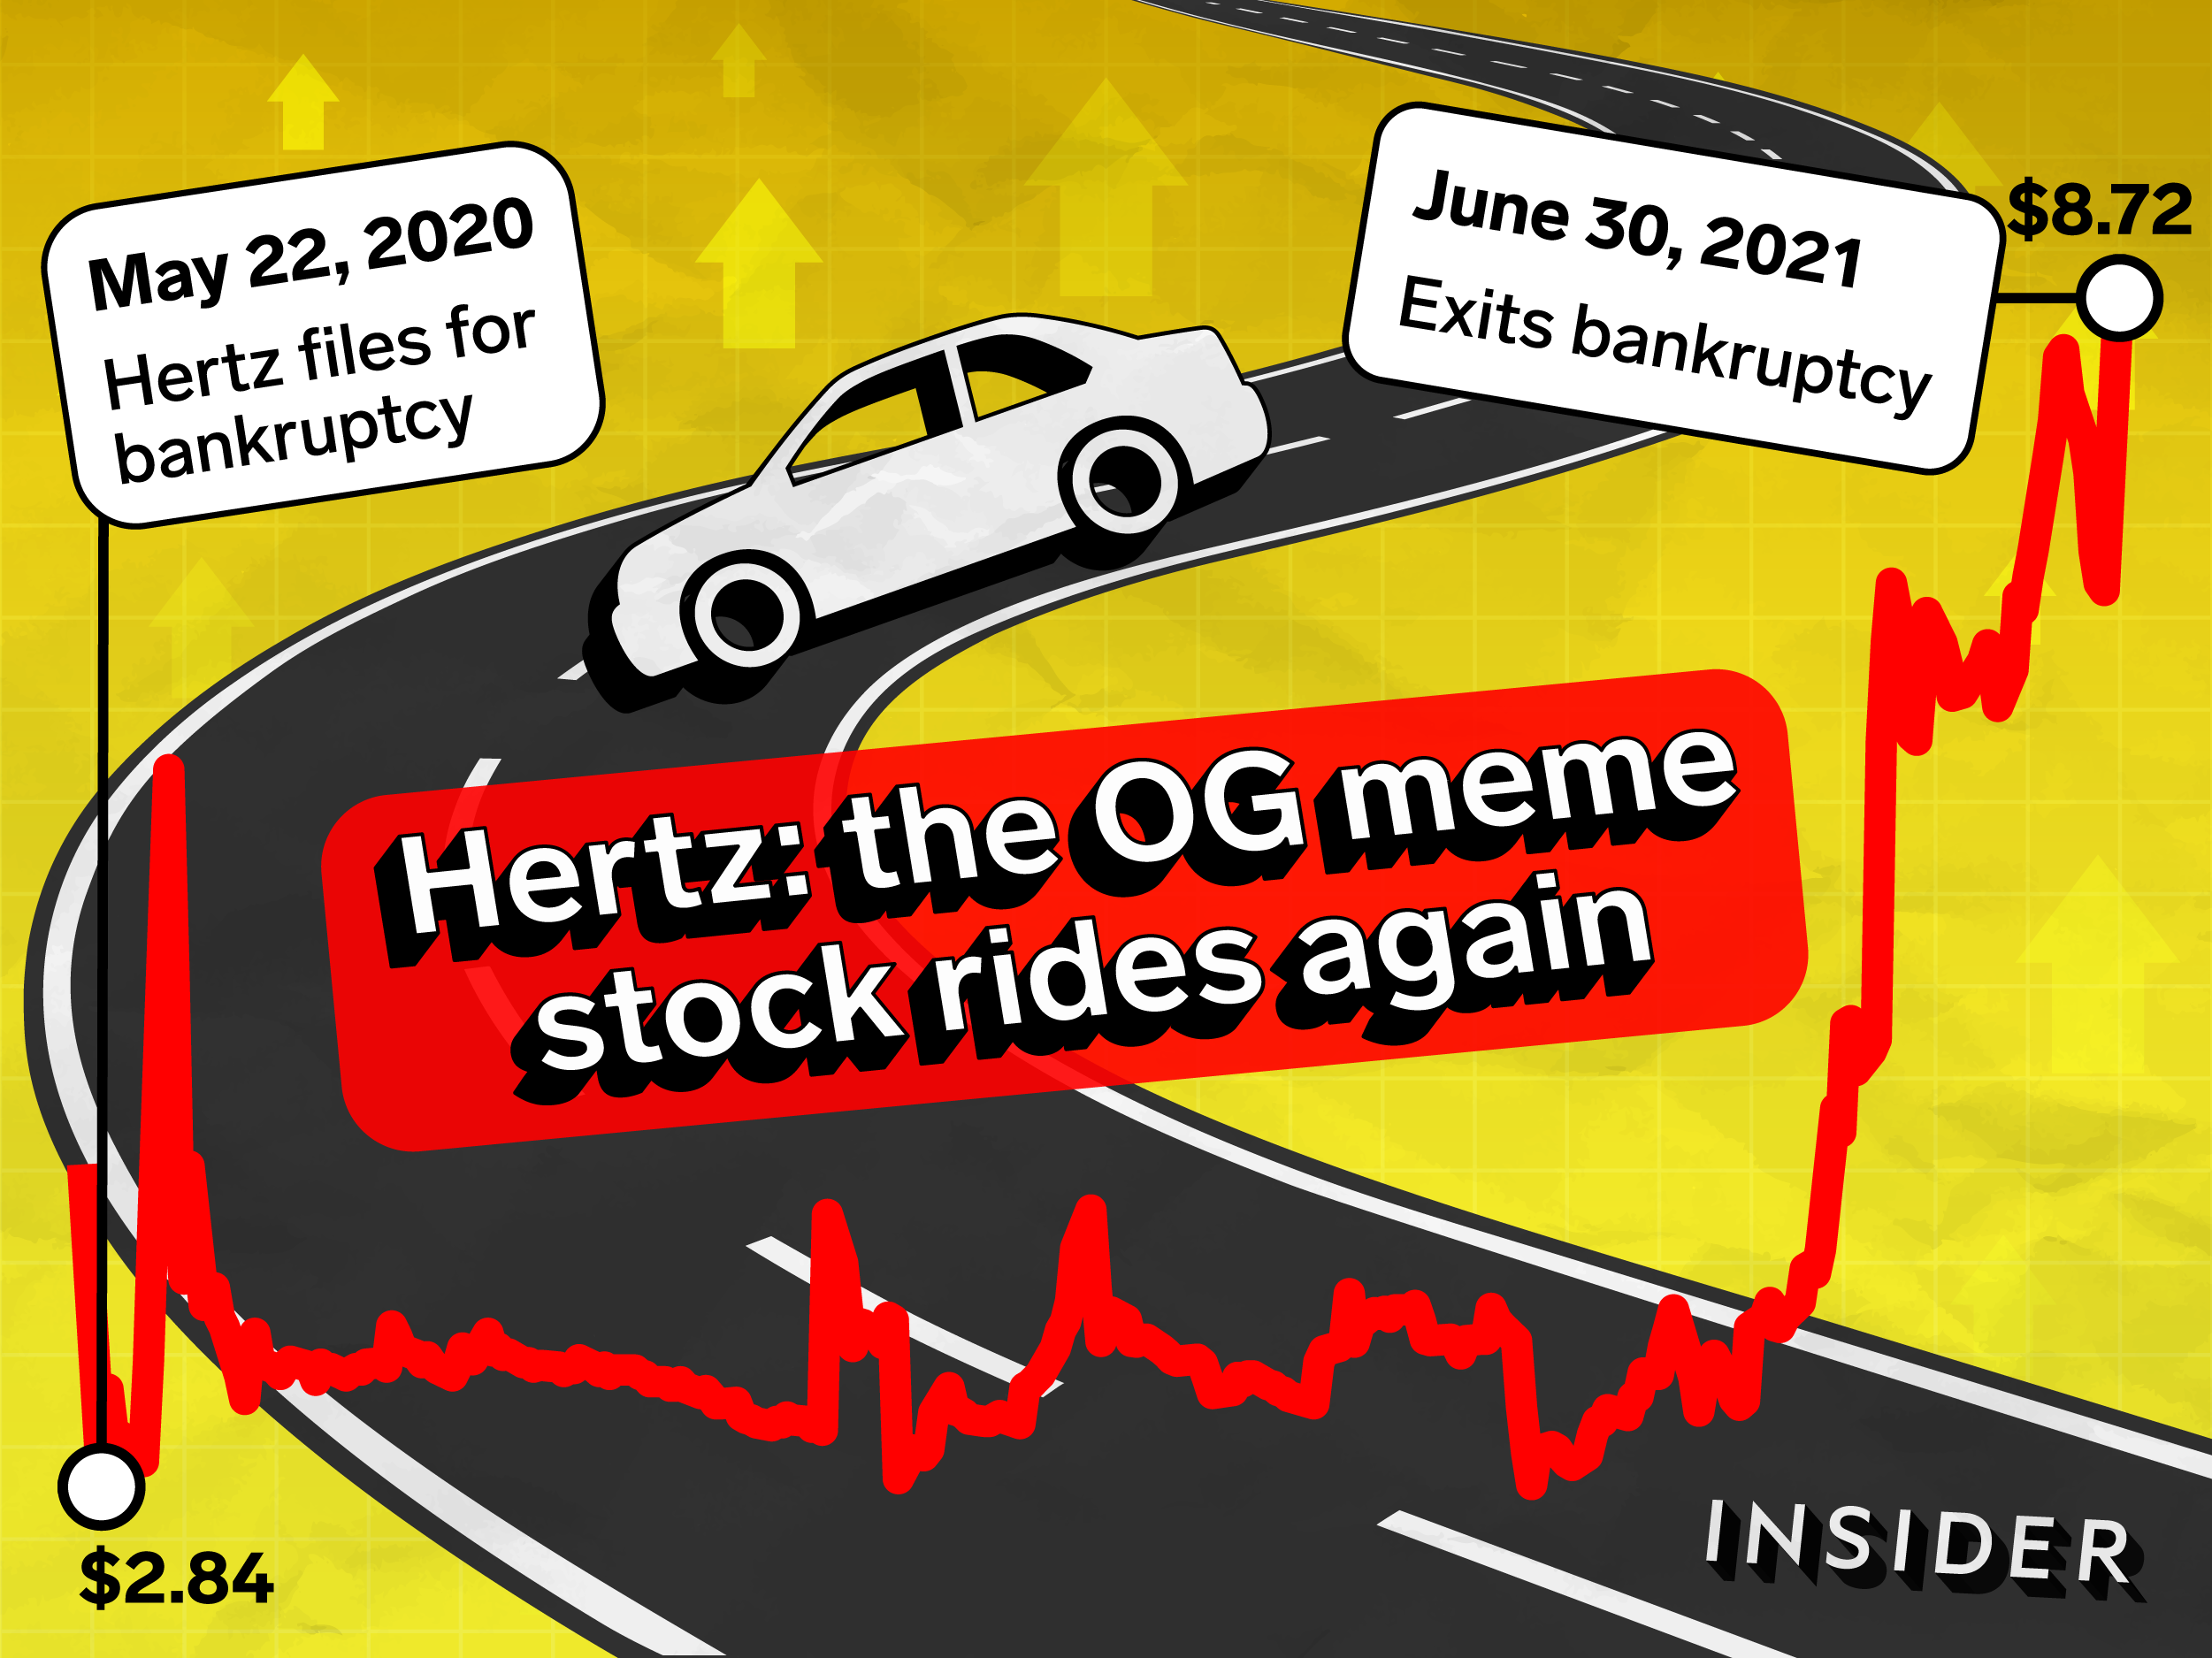 Insider's NFT on Hertz, including a chart, car and road illustrations on a yellow background.